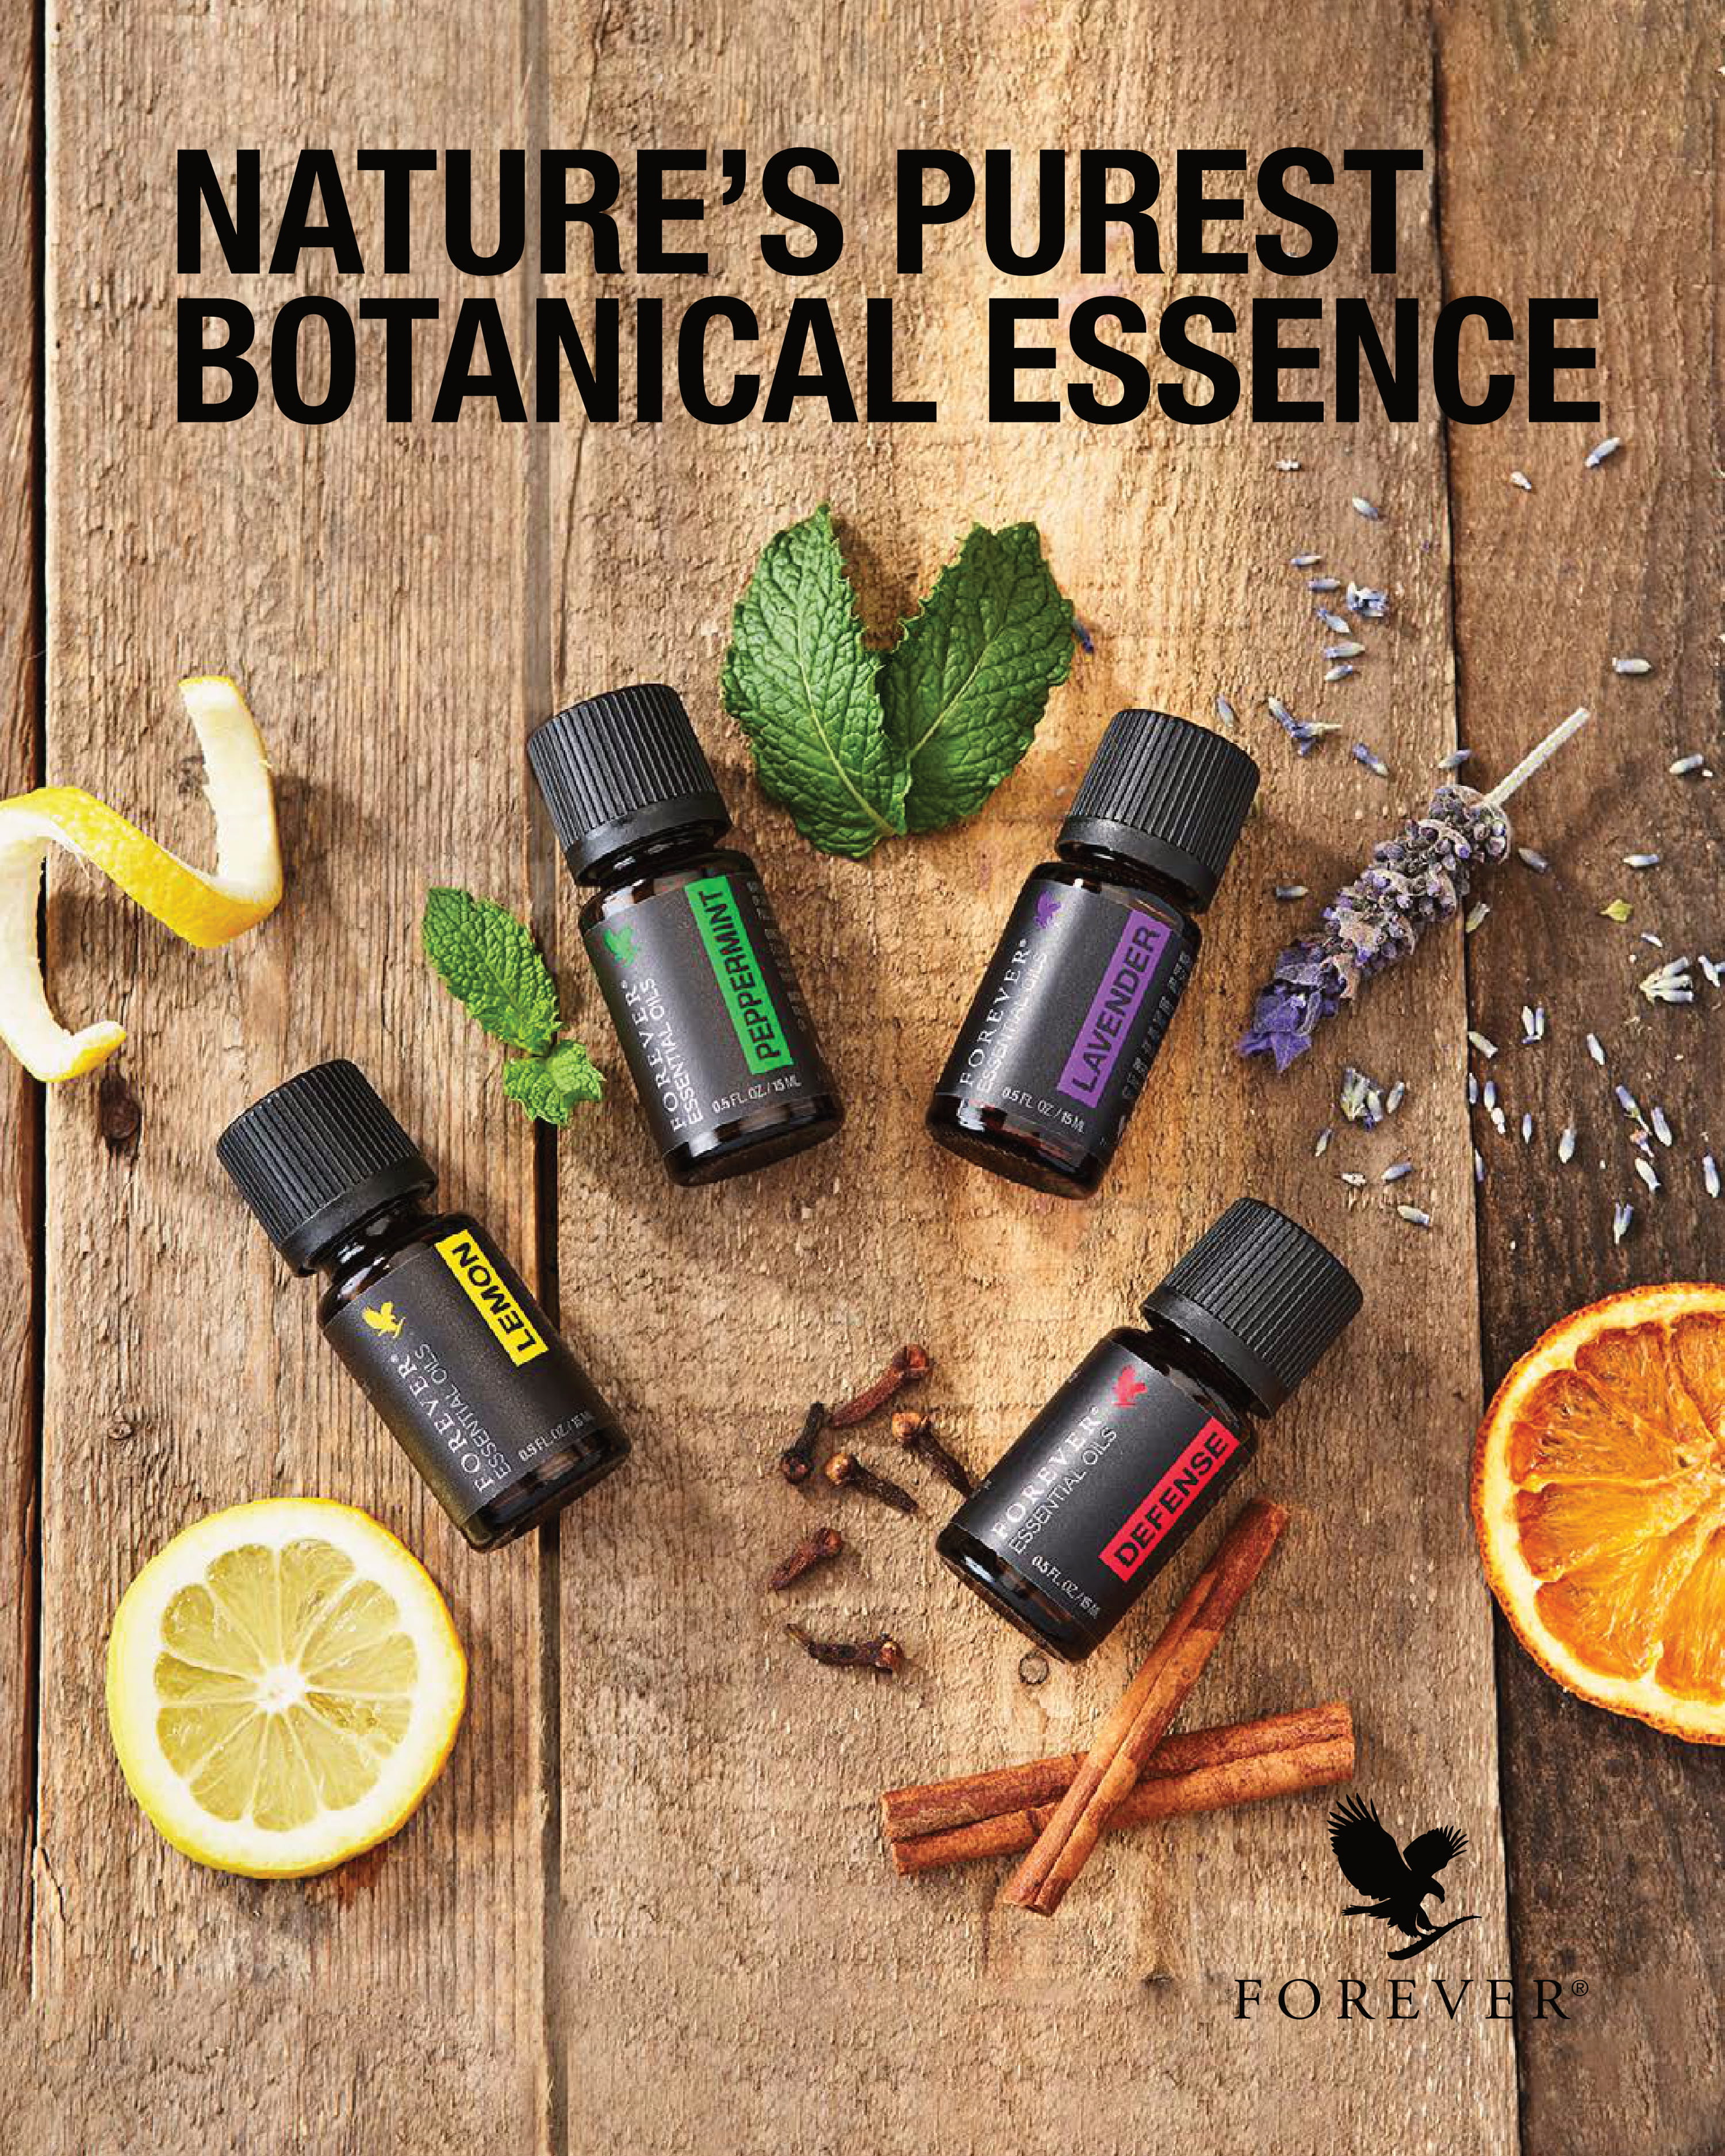 Forever Products International on Twitter: "Essential Oils are now available in many of your countries! If they aren't available you yet, tuned! https://t.co/iysDV3guNI" / Twitter